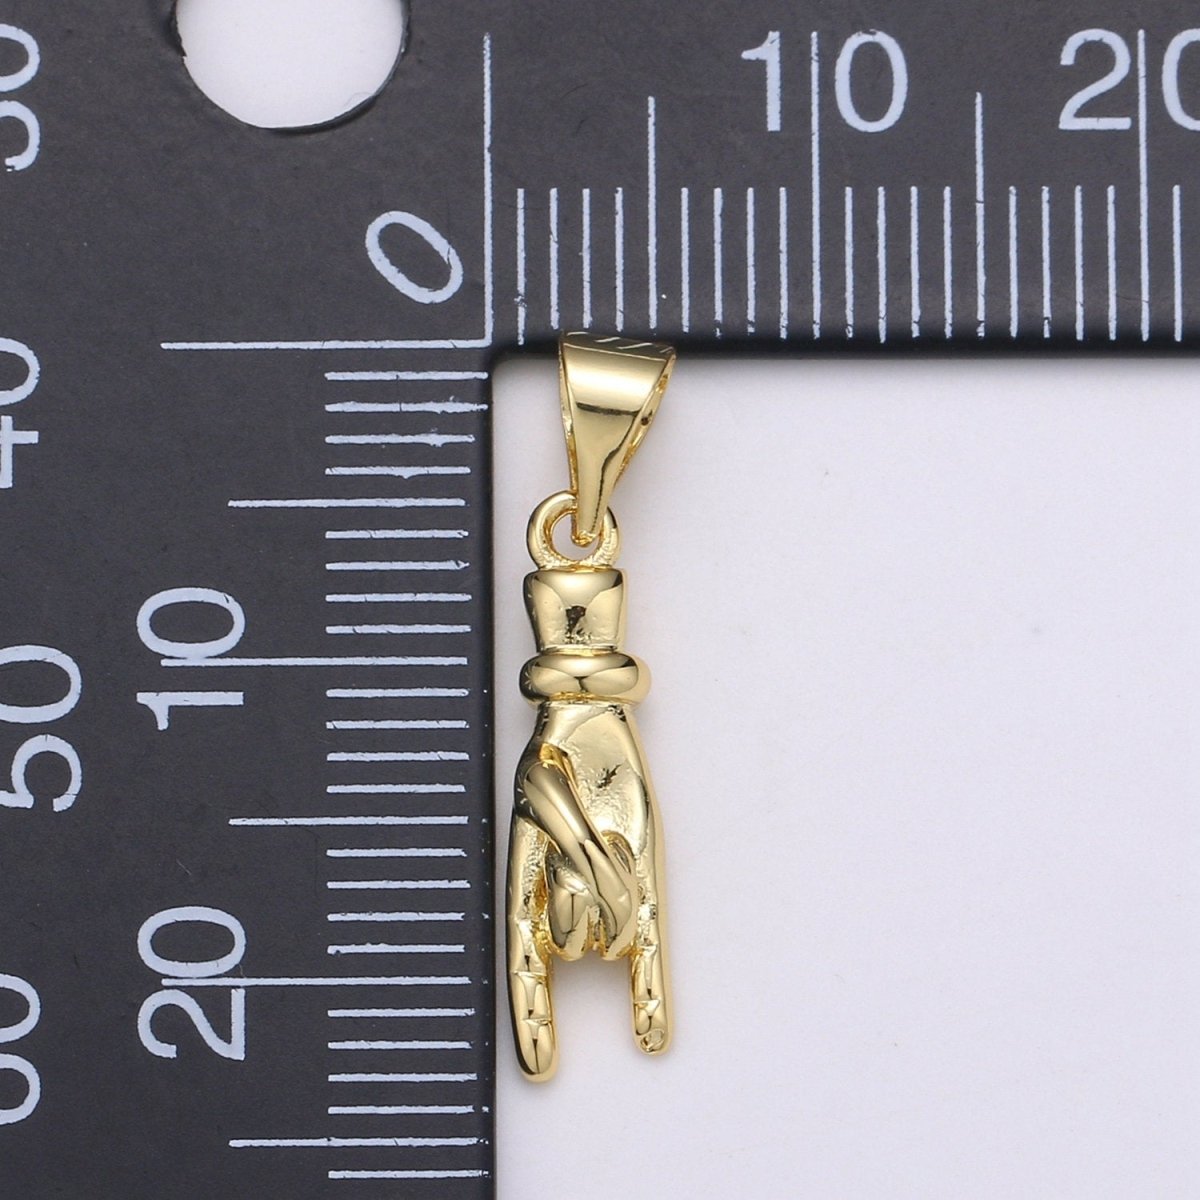 14K Gold Filled Hand Charm Mano Cornuto Good Luck Sign Pendant Hand Gesture Charm Pendant for Necklace Bracelet Earring Supply J-052 - DLUXCA